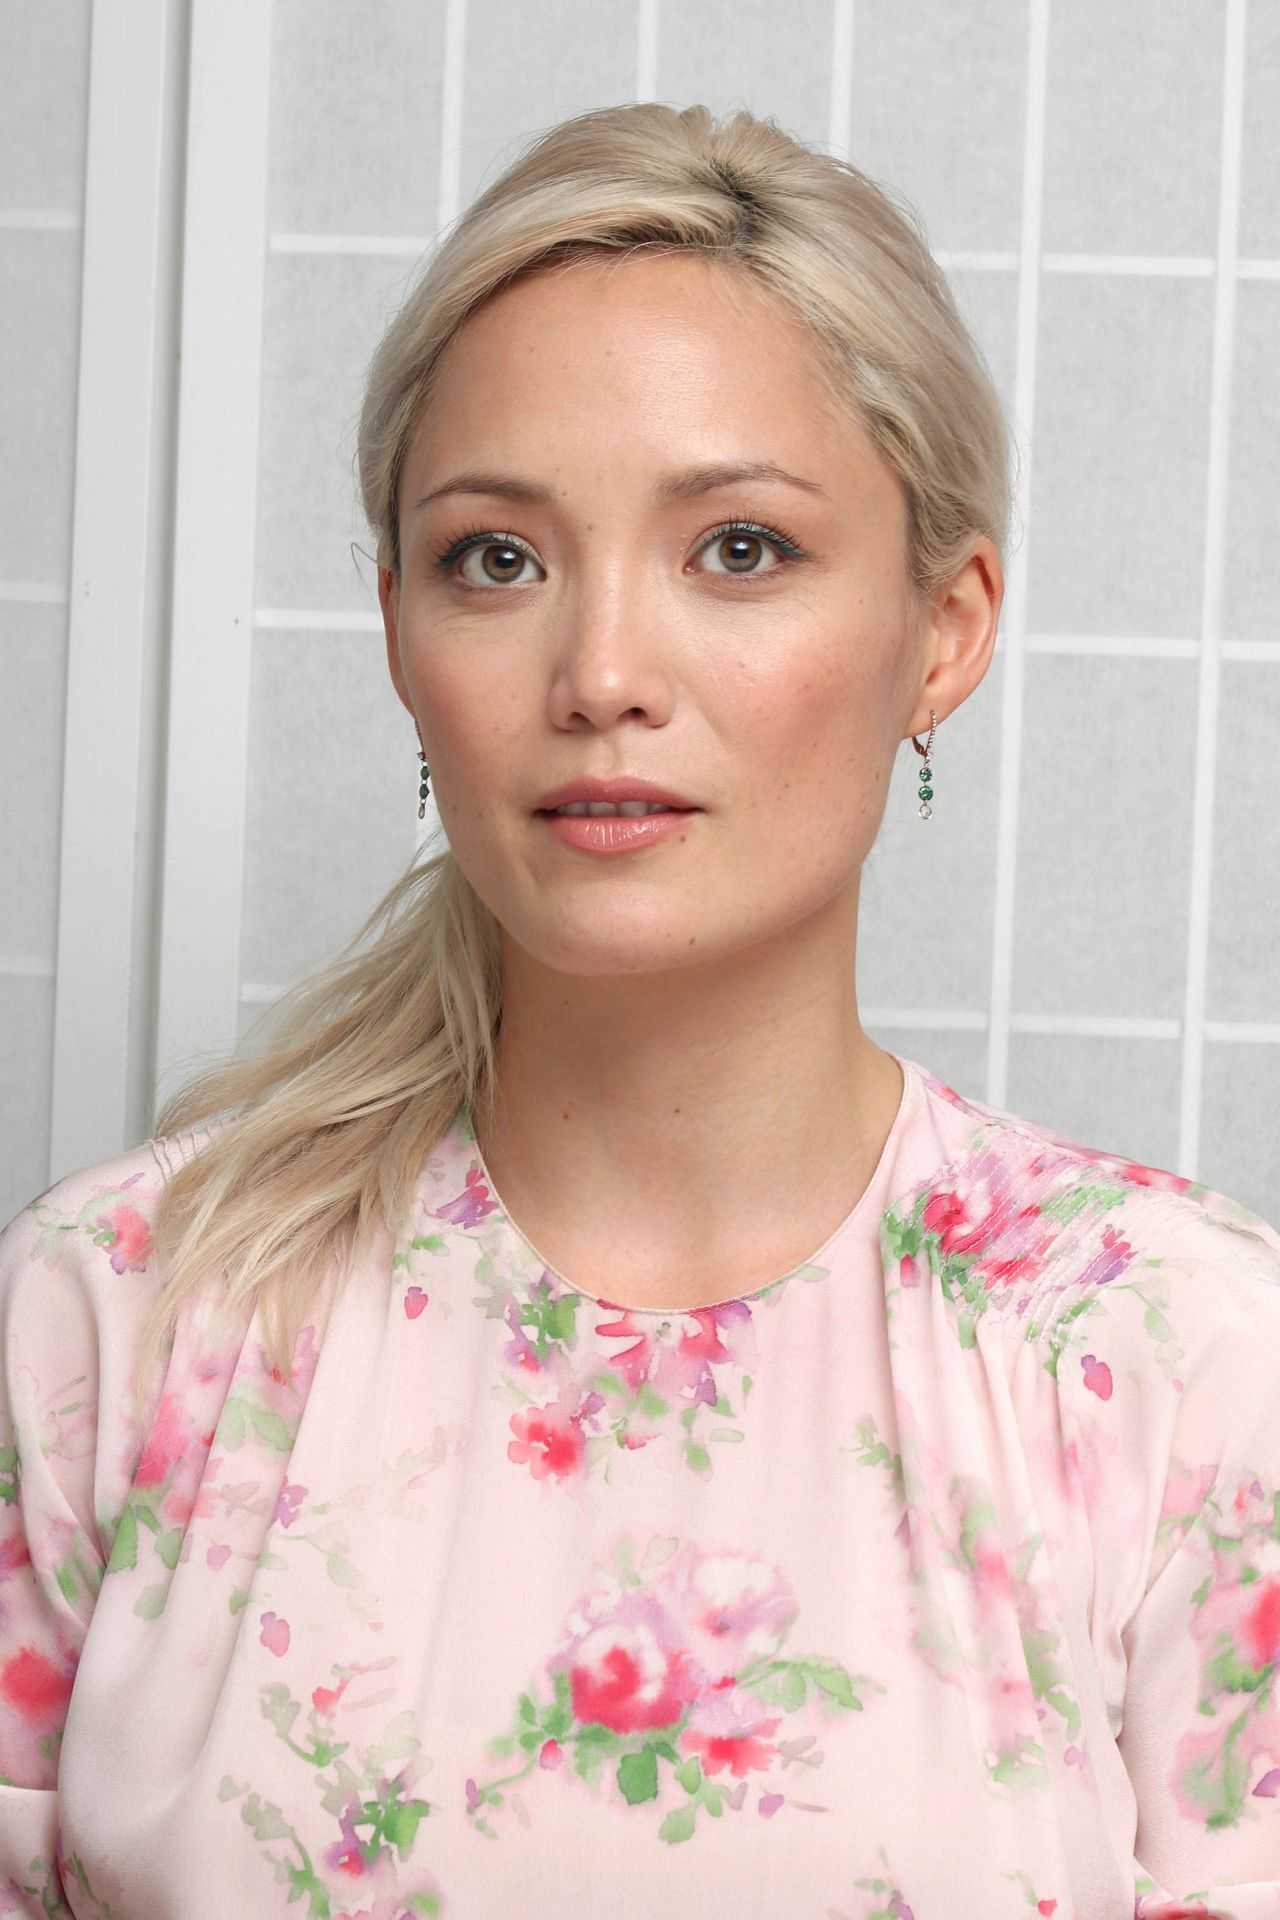 70+ Hot Pictures Of Pom Klementieff Who Plays Mantis In Marvel Cinematic Universe 155